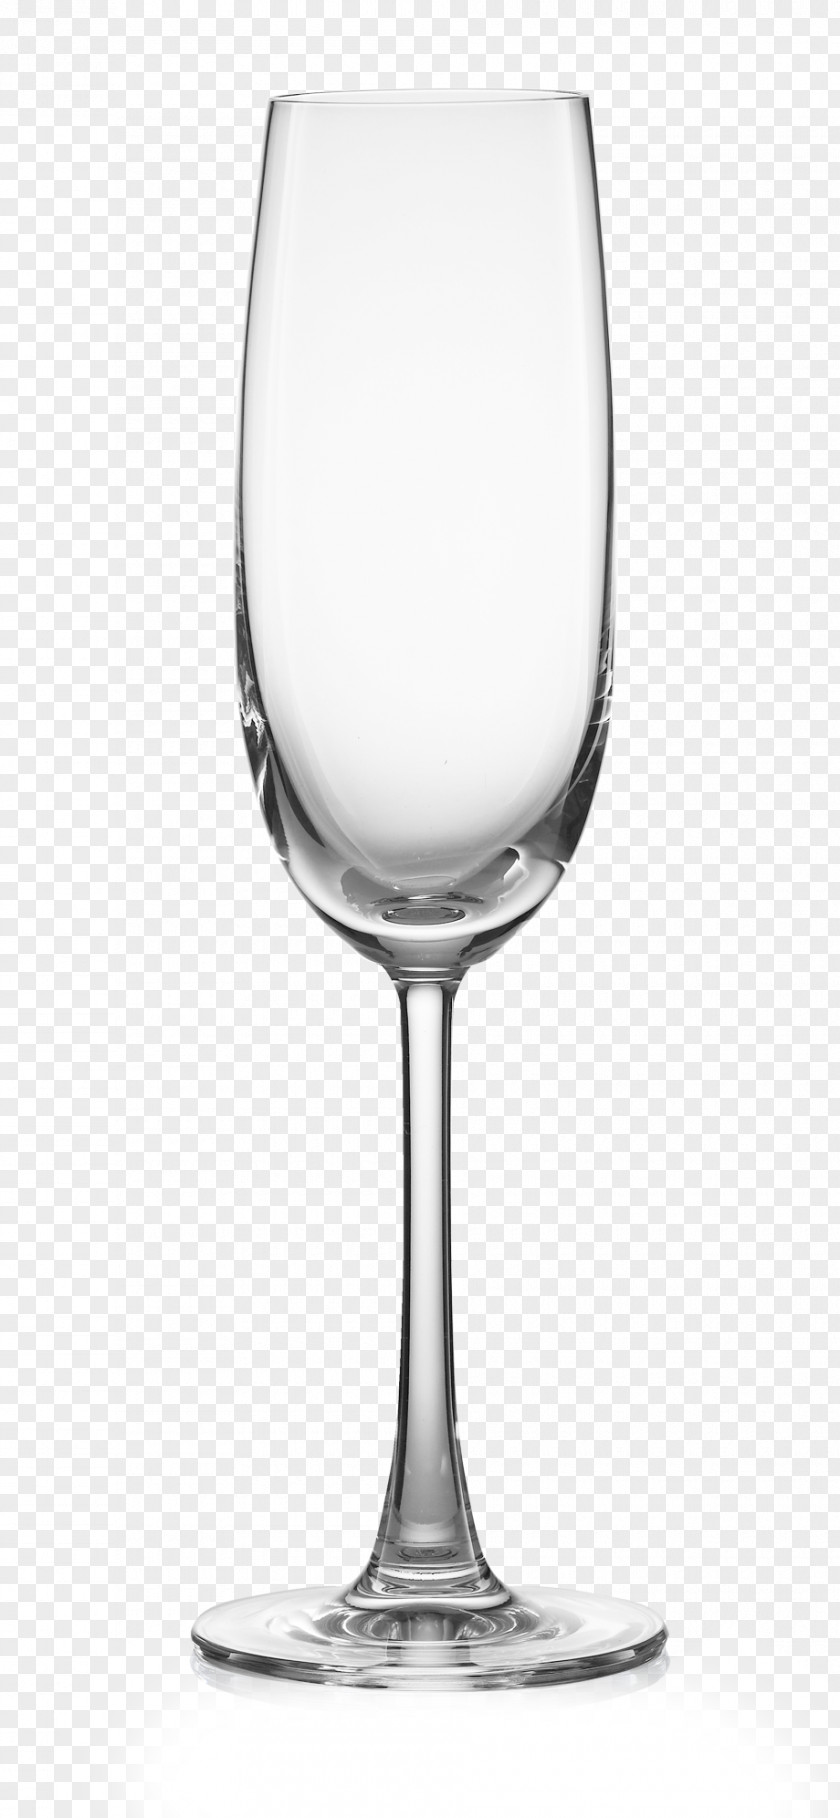 Champagne Whiskey Wine Cocktail Snifter Glencairn Whisky Glass PNG